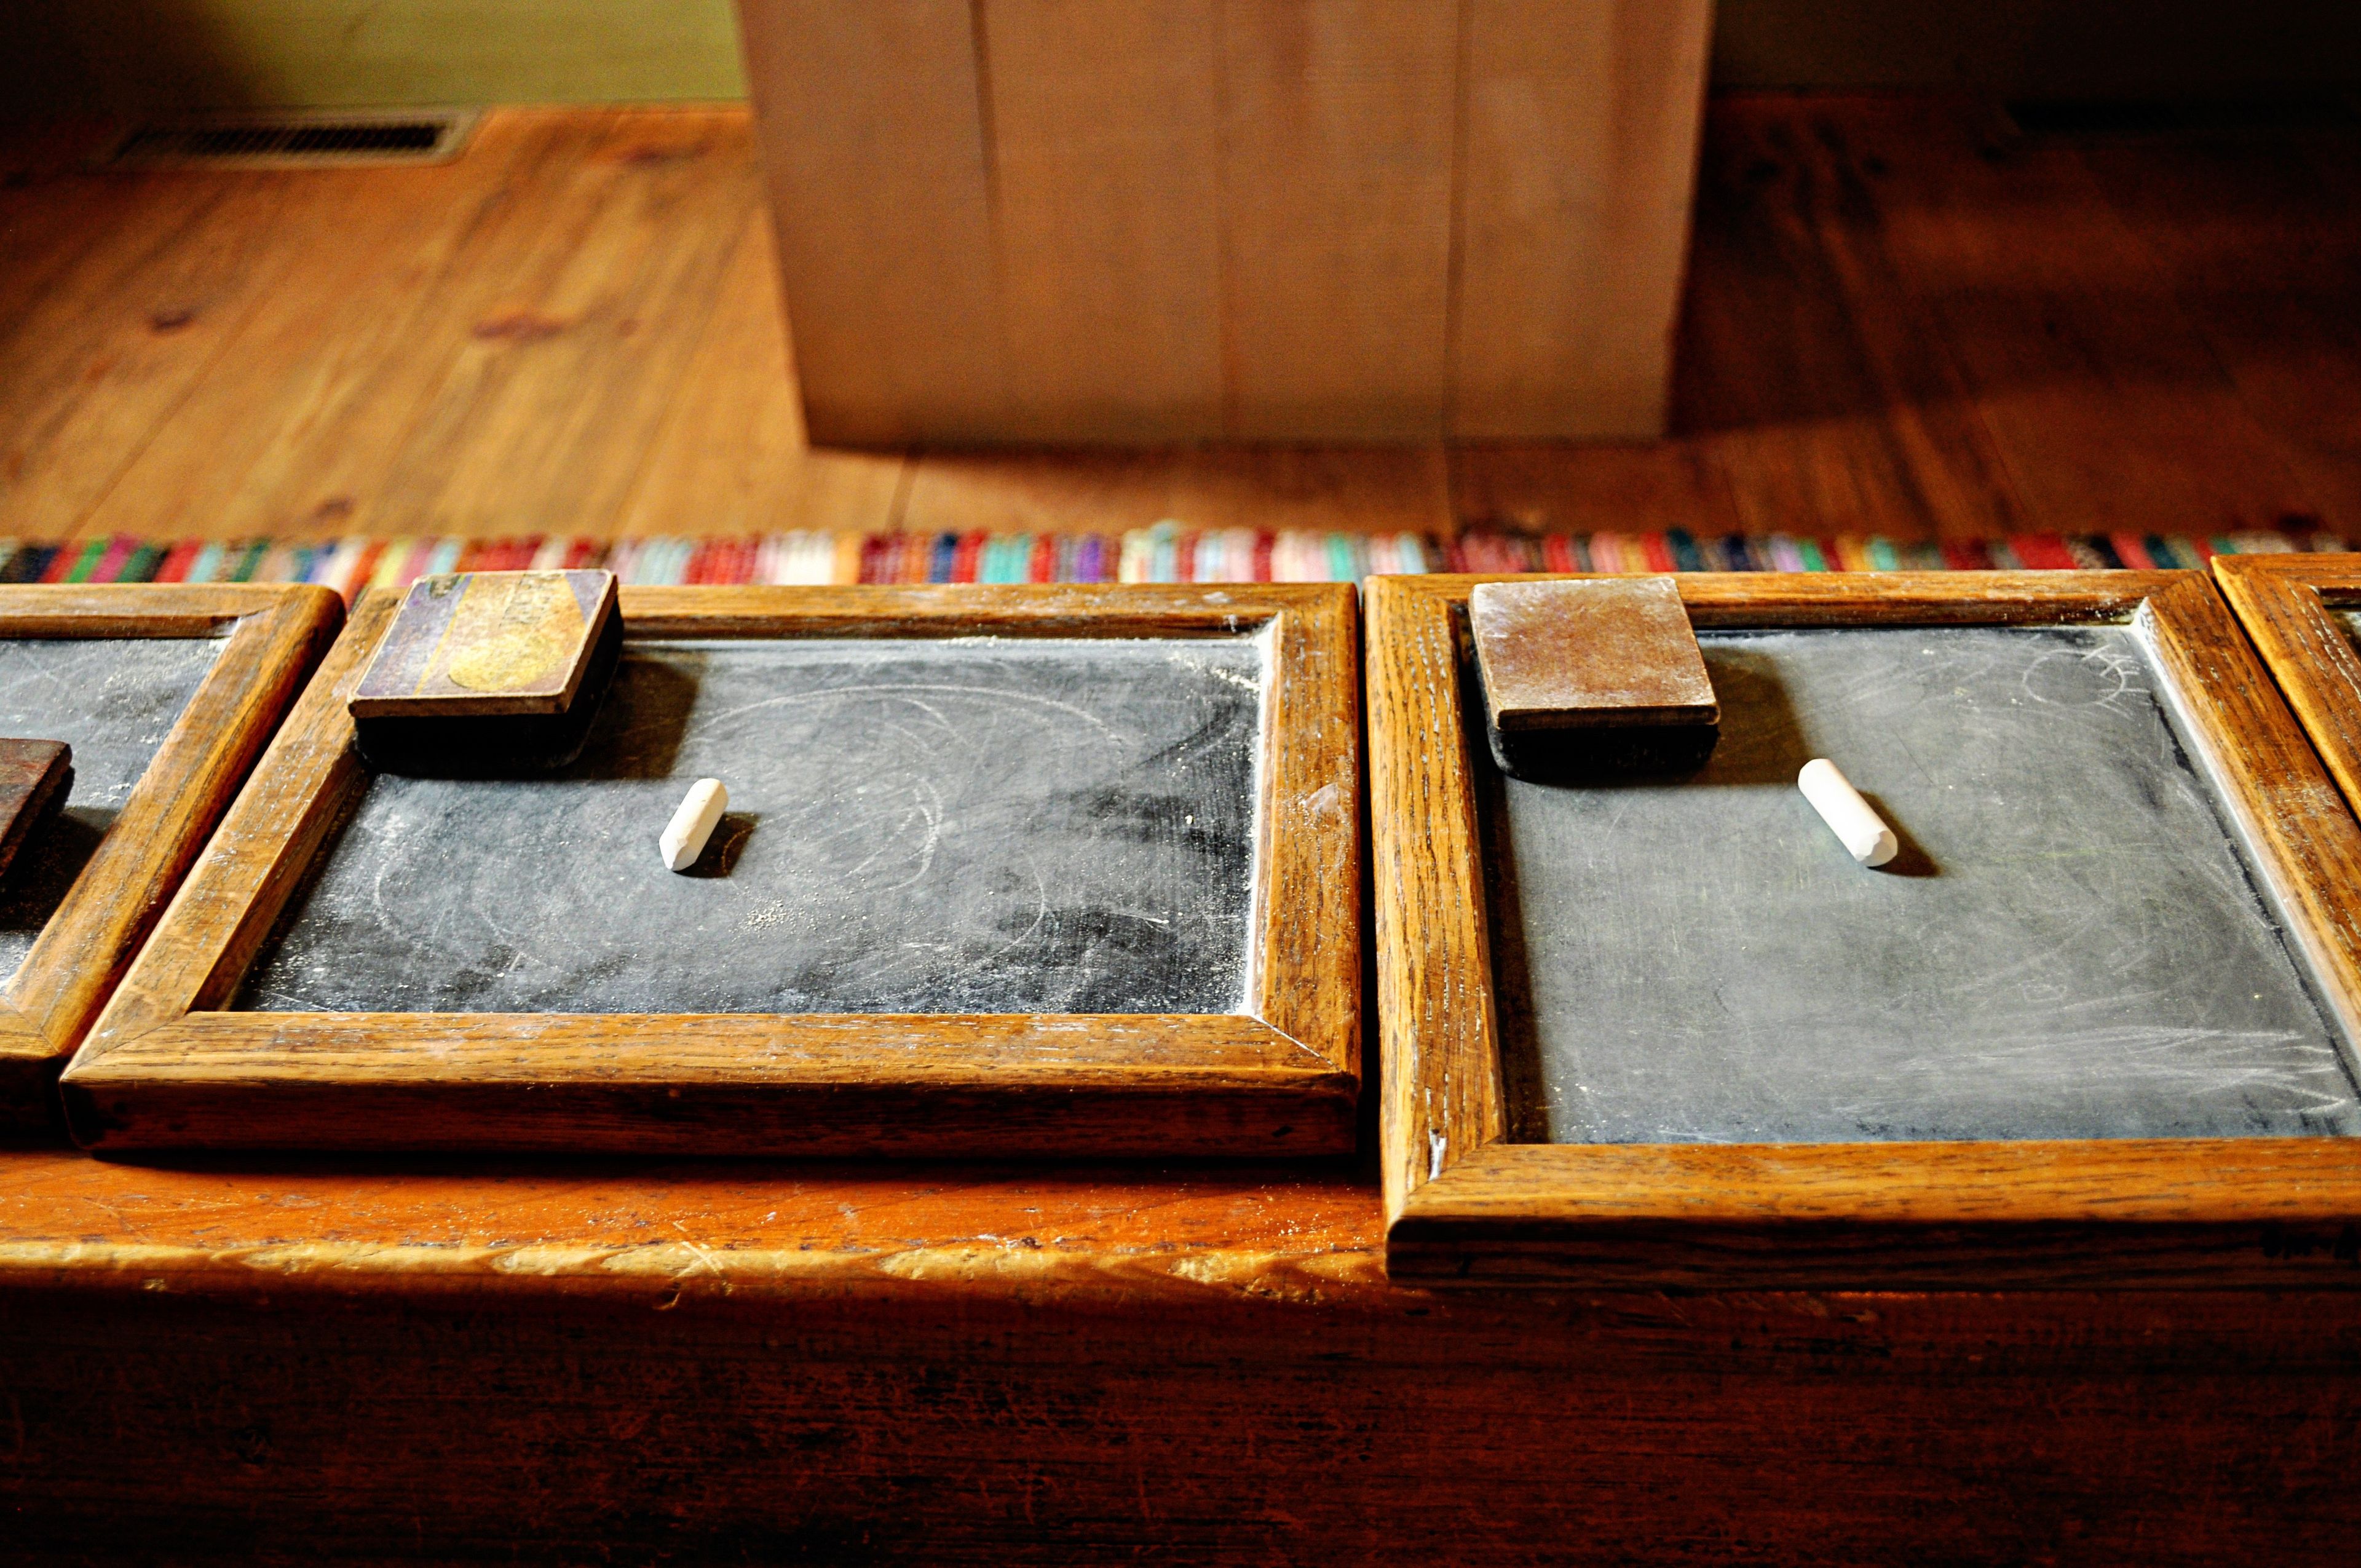 Several small chalkboards with chalk and erasers are lined up on a bench in a schoolhouse.